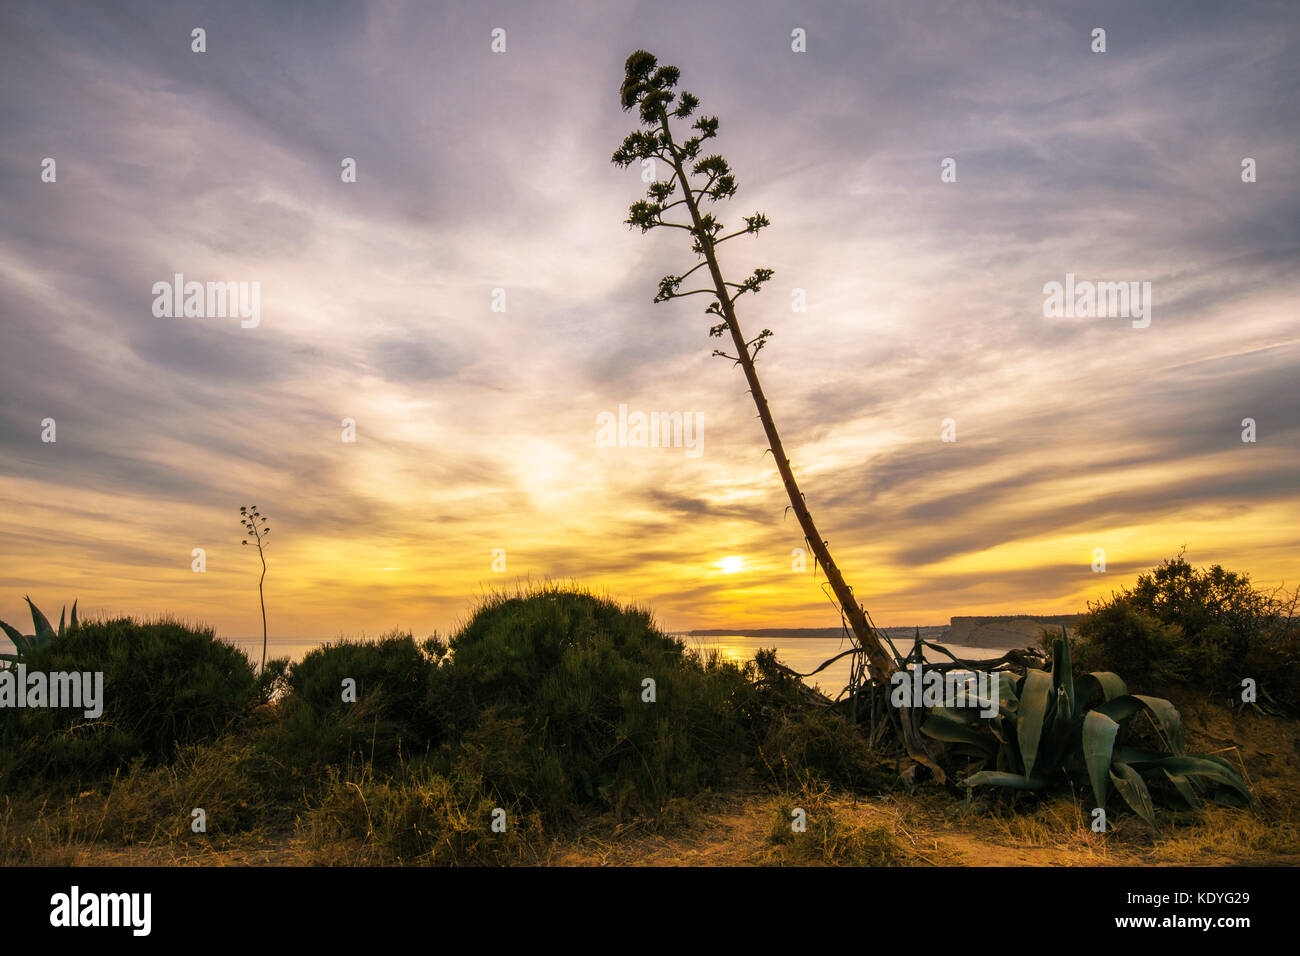 A tree is silhouetted against a setting sun in the Algarve, Portugal Stock Photo